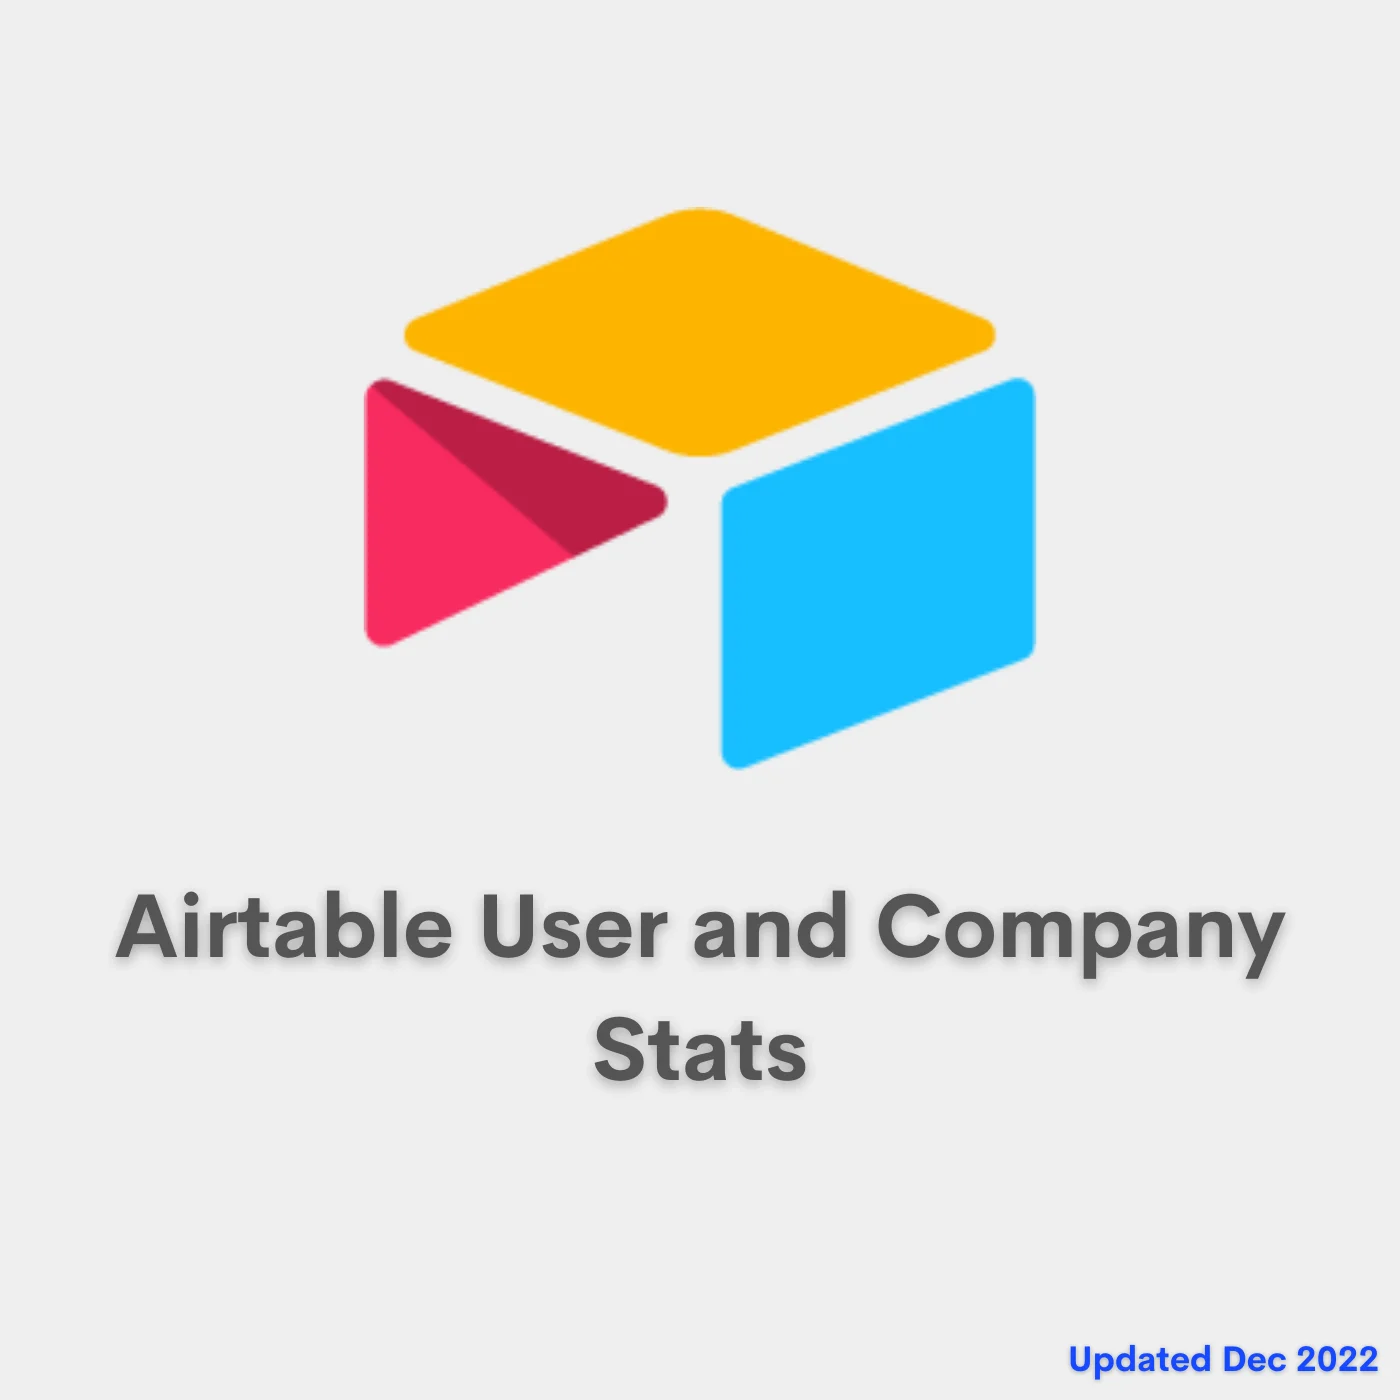 Airtable Stats – Revenue, Valuation, Employees, and More